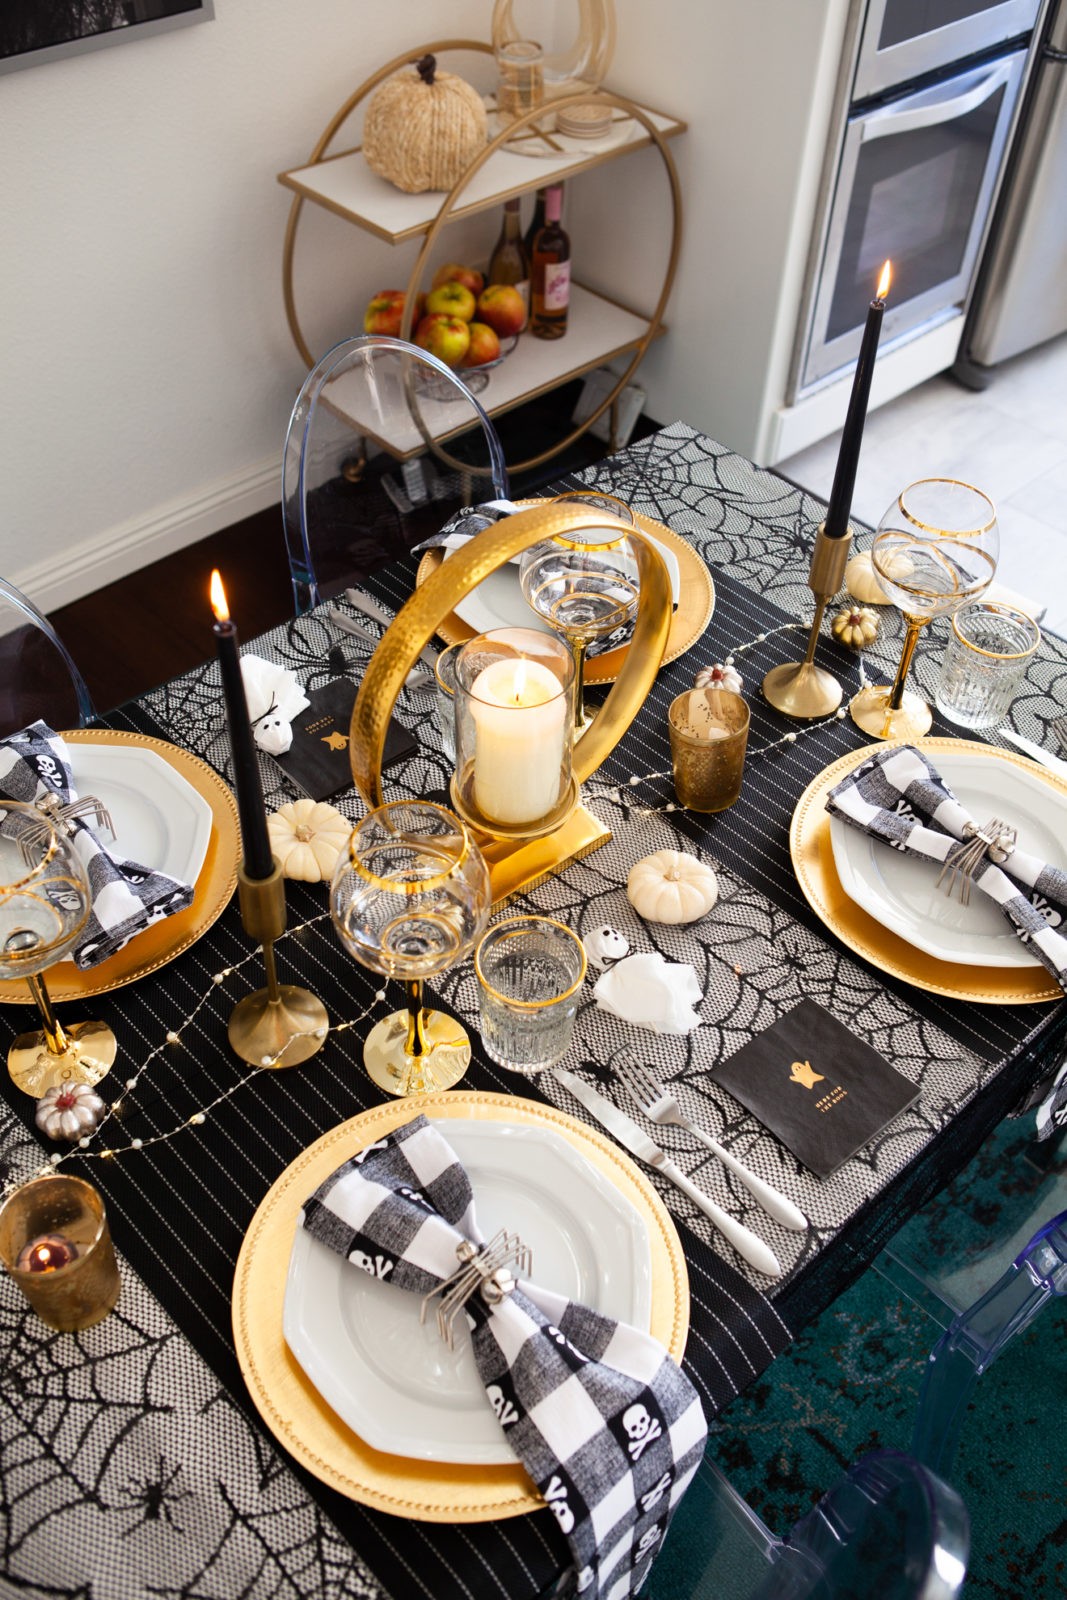 Fun and Easy Halloween Tablescape Decorating Ideas by Home Decor Blogger Laura Lily | Fun and Easy Halloween Table Decor Ideas by popular California lifestyle blogger, Laura Lily: image of table decorated with black candlesticks, gold stem glassware, gold plate chargers, spider web tablecloth, black and white gingham napkins, and silver spider napkin rings. 